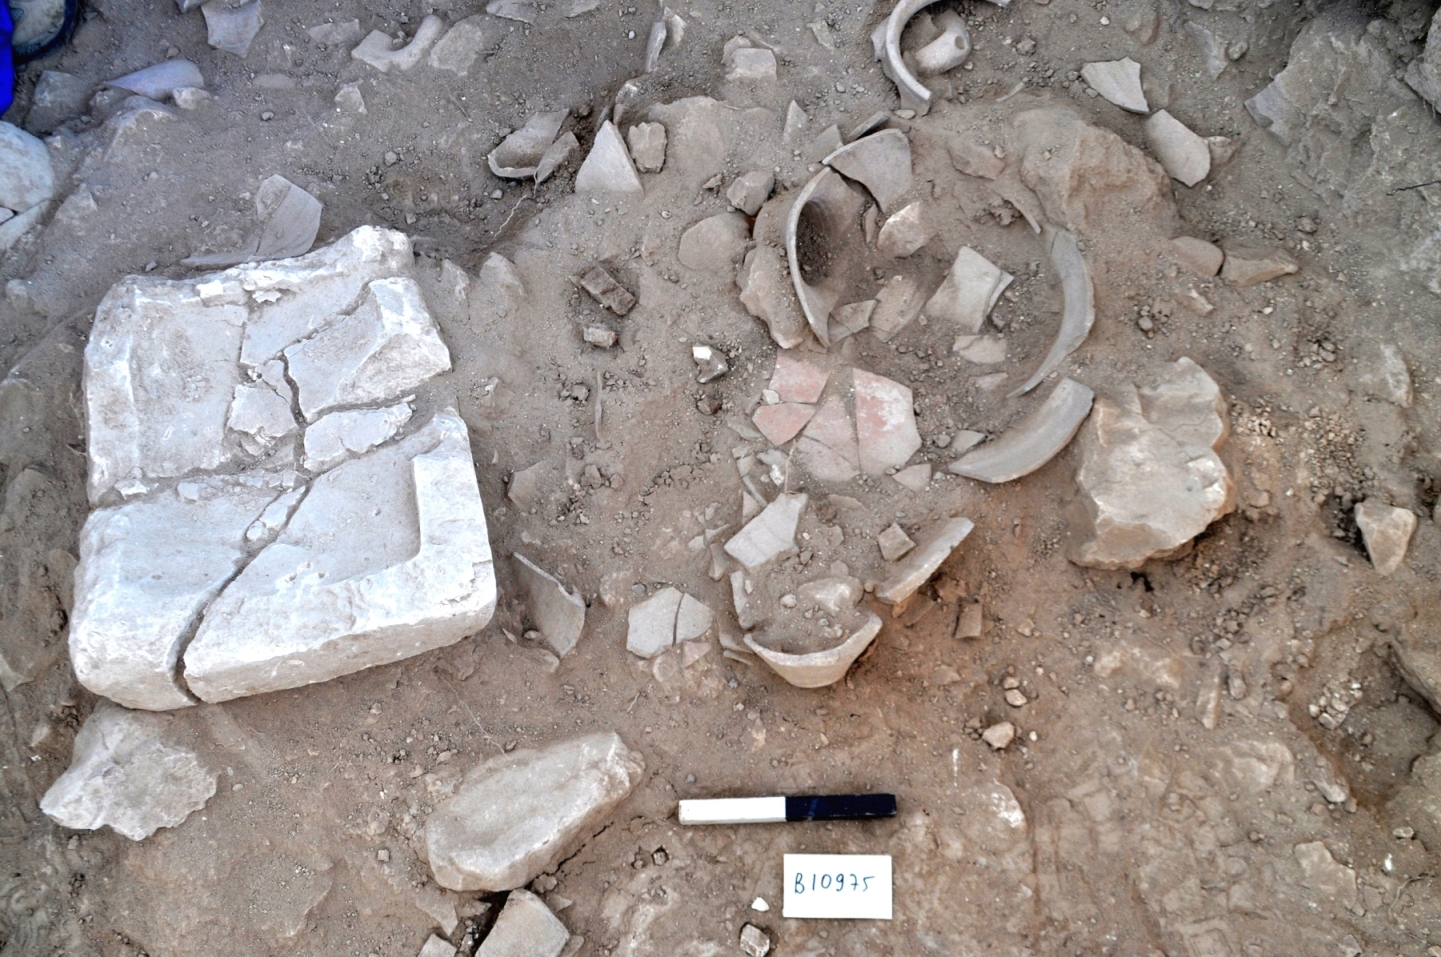 Illustration 4: A destruction layer on the floor of one of the houses in Khirbet Qeiyafa (Photo courtesy of the excavation expedition)